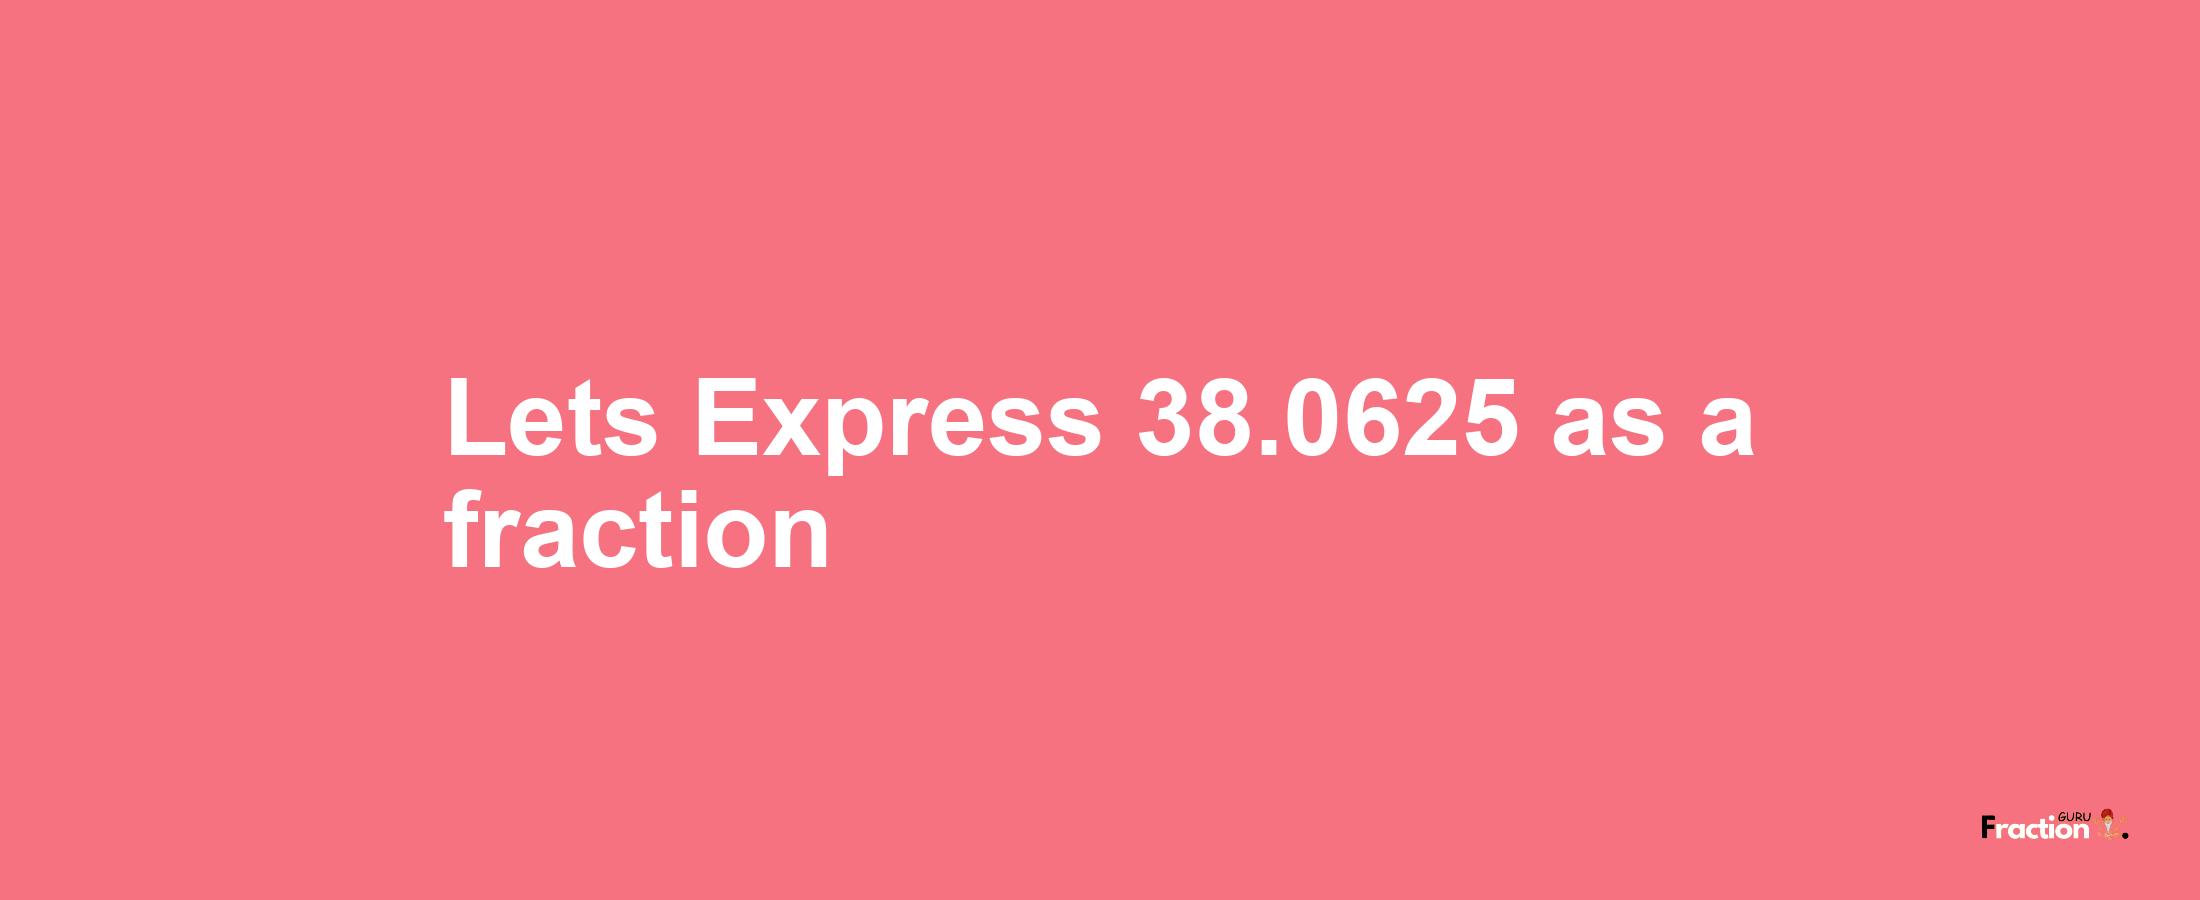 Lets Express 38.0625 as afraction